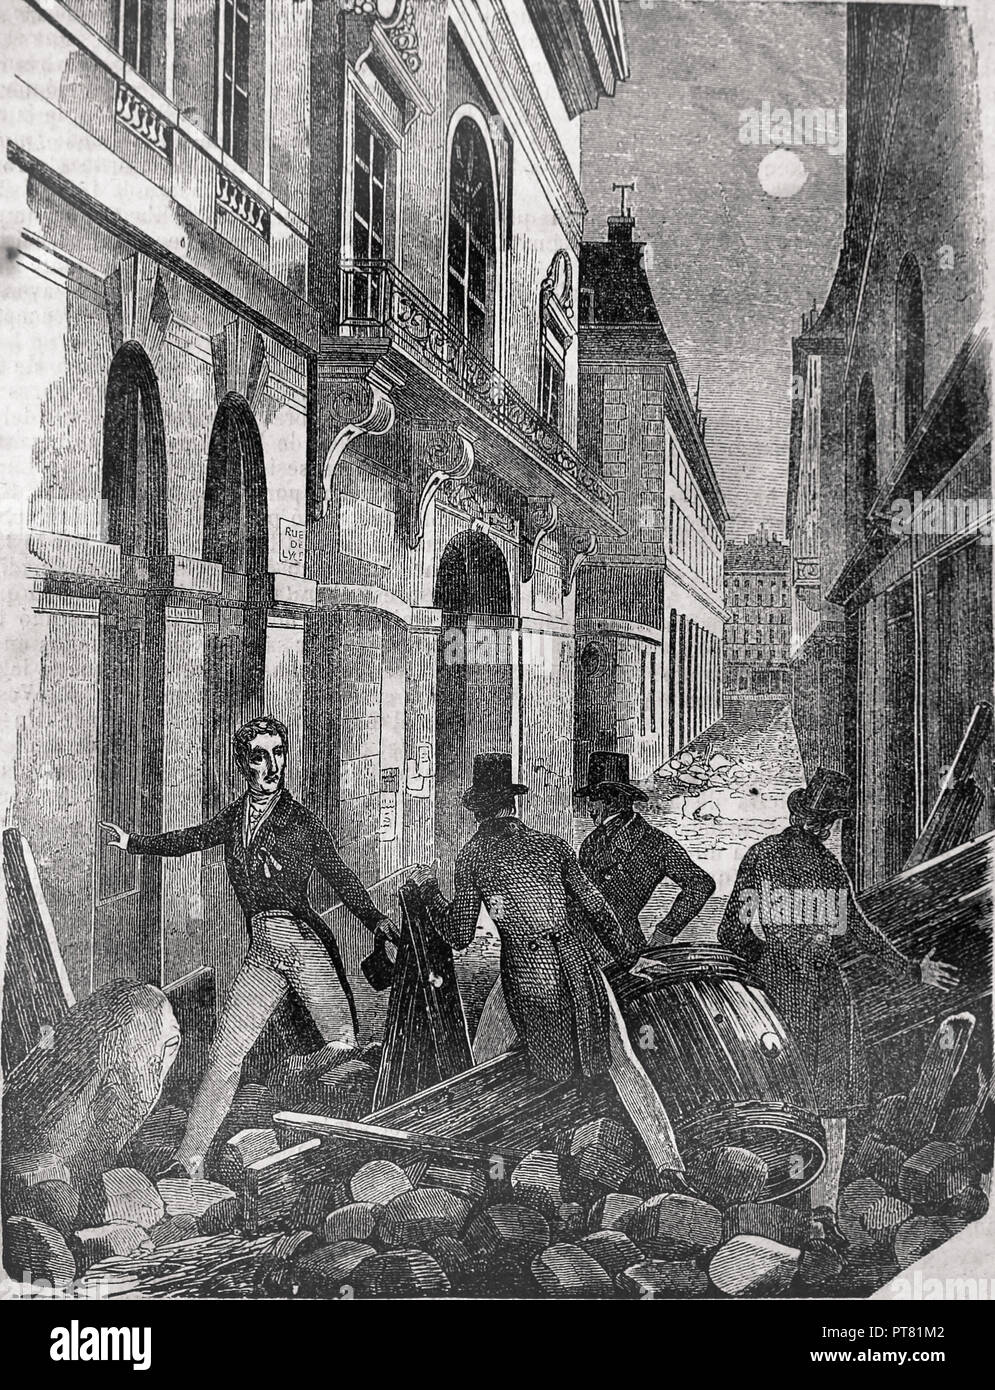 French. July Revolution, 1830. Marquis de Lafayette visiting the barricades. Engraving, 19th century. Stock Photo